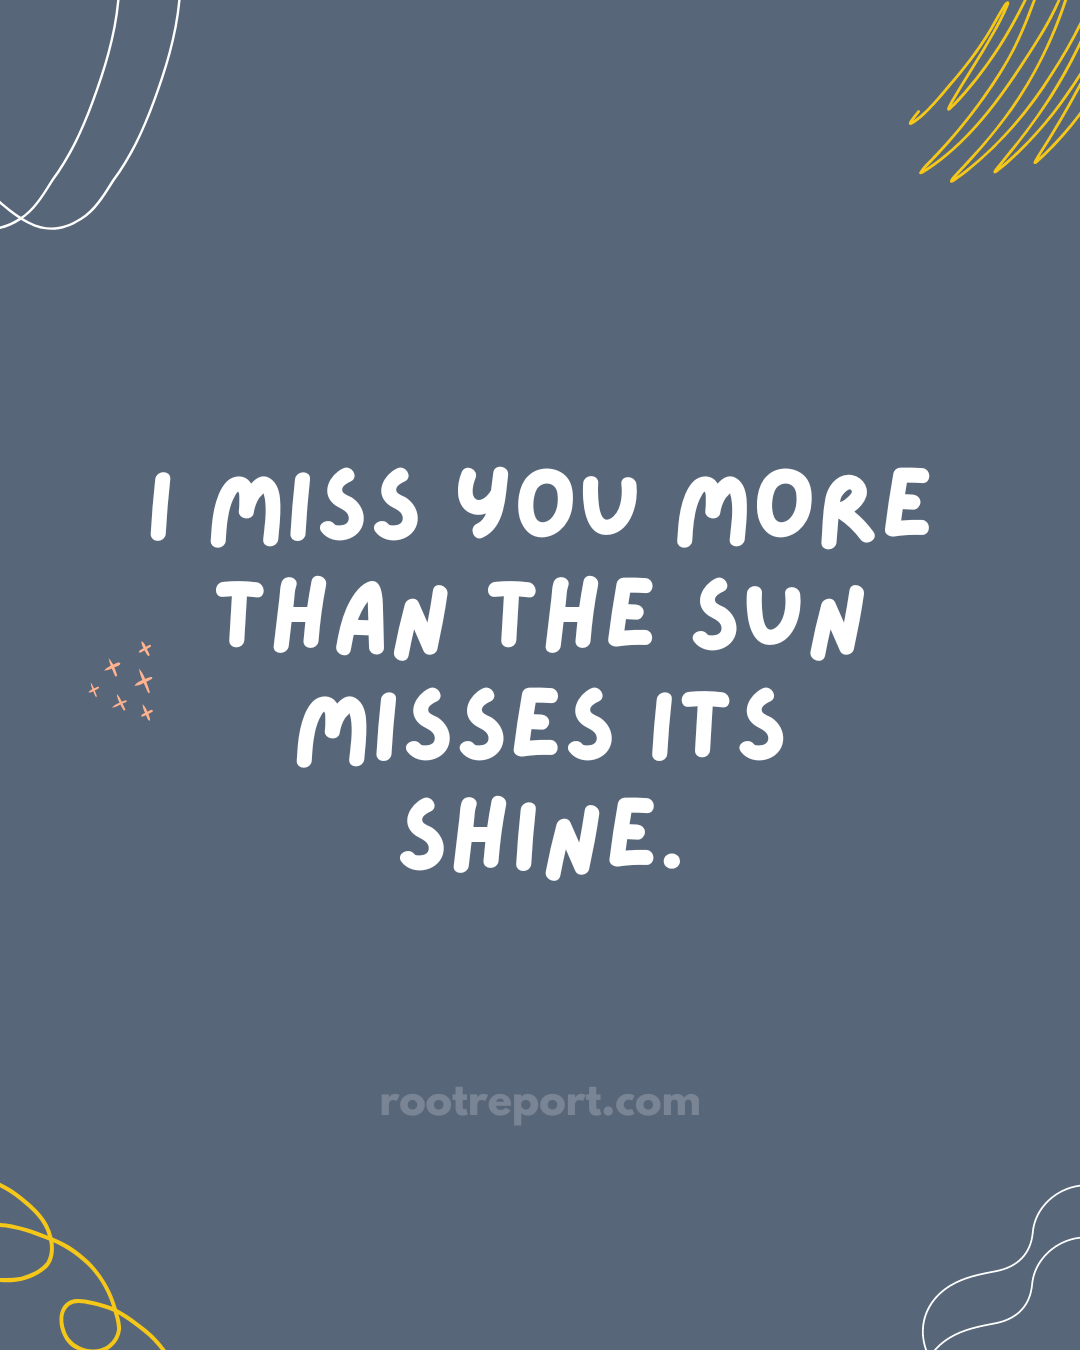 I miss you more than the sun misses its shine.